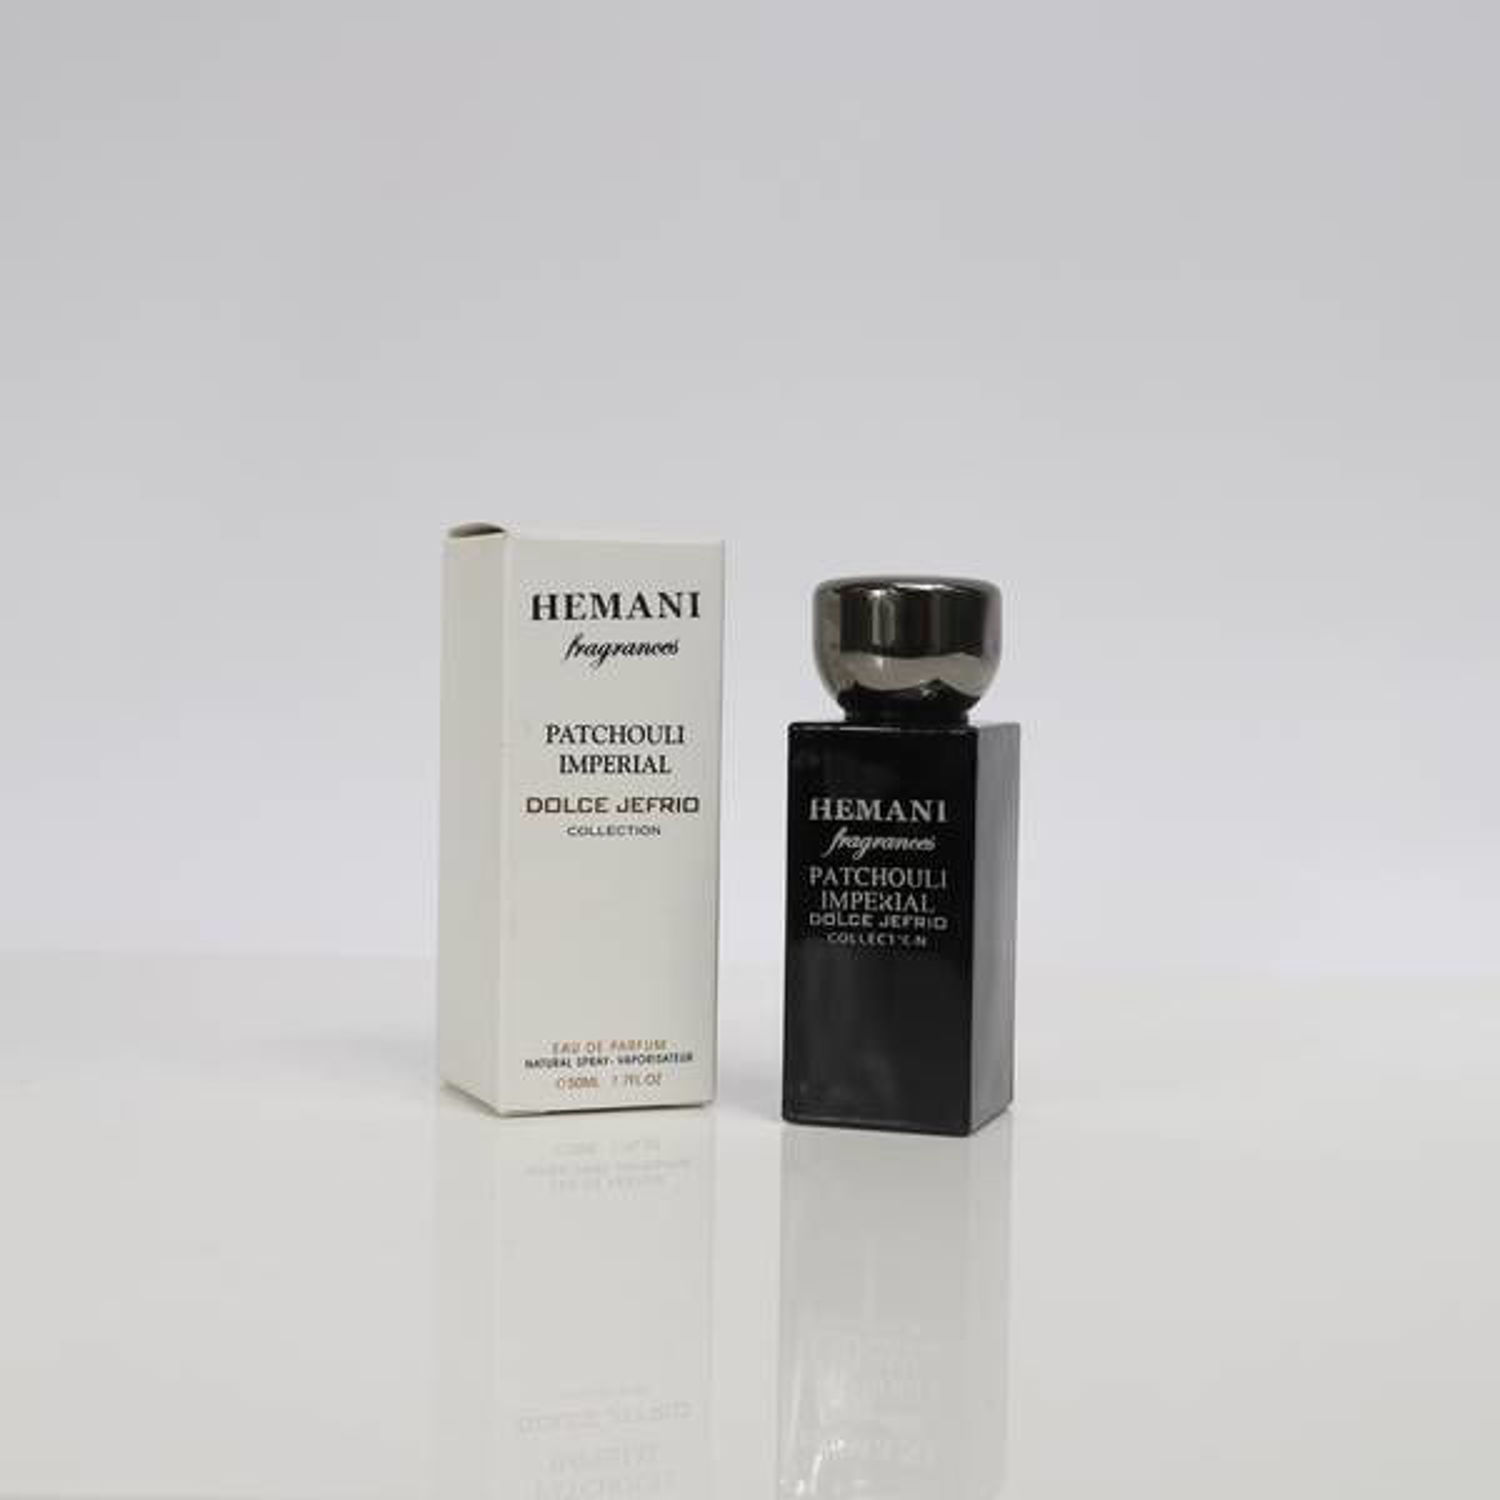 Picture of Hemani Patchouli Imperial Dolce Jefrio Perfume 50ml